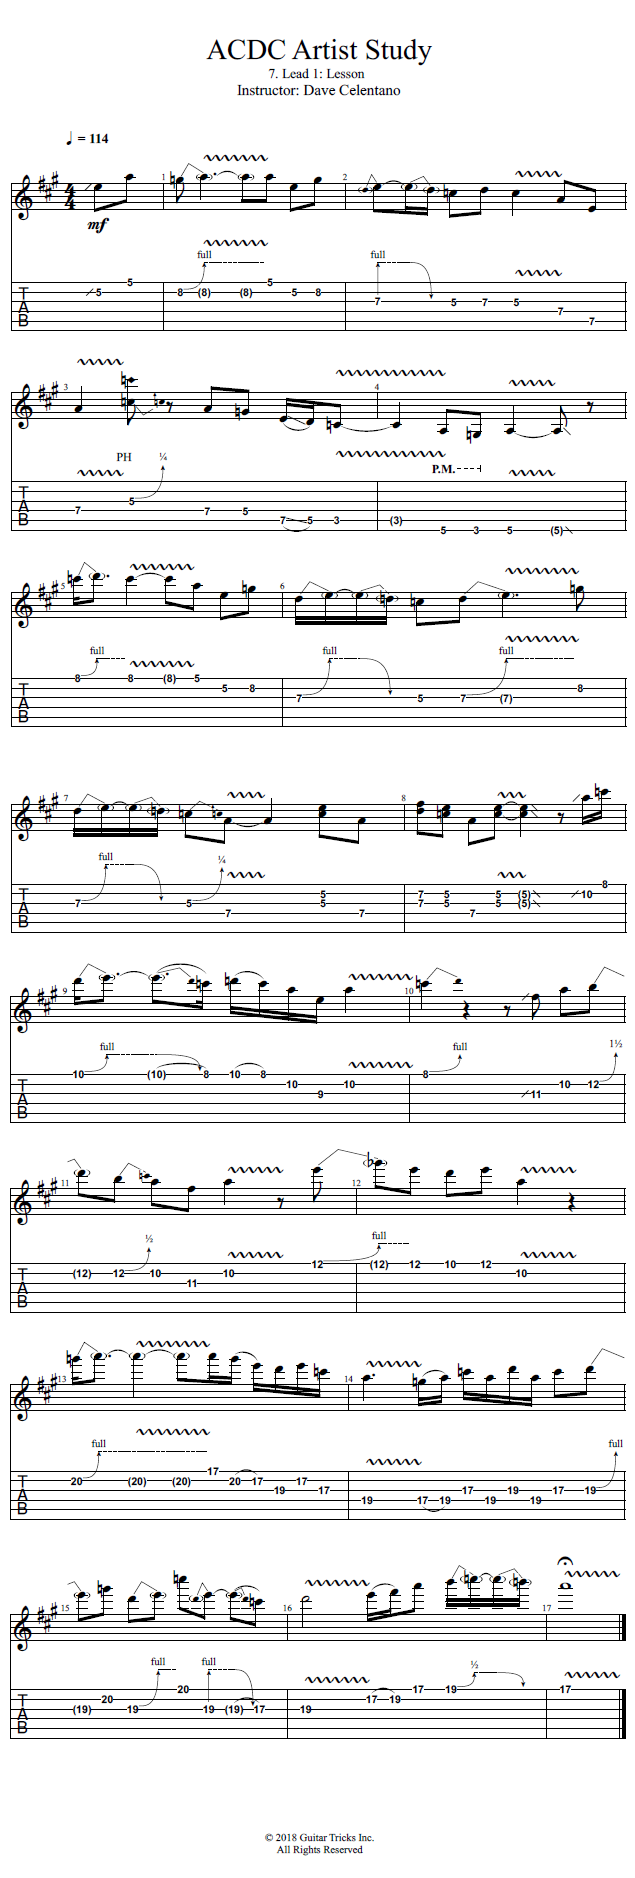 Lead 1: Lesson song notation